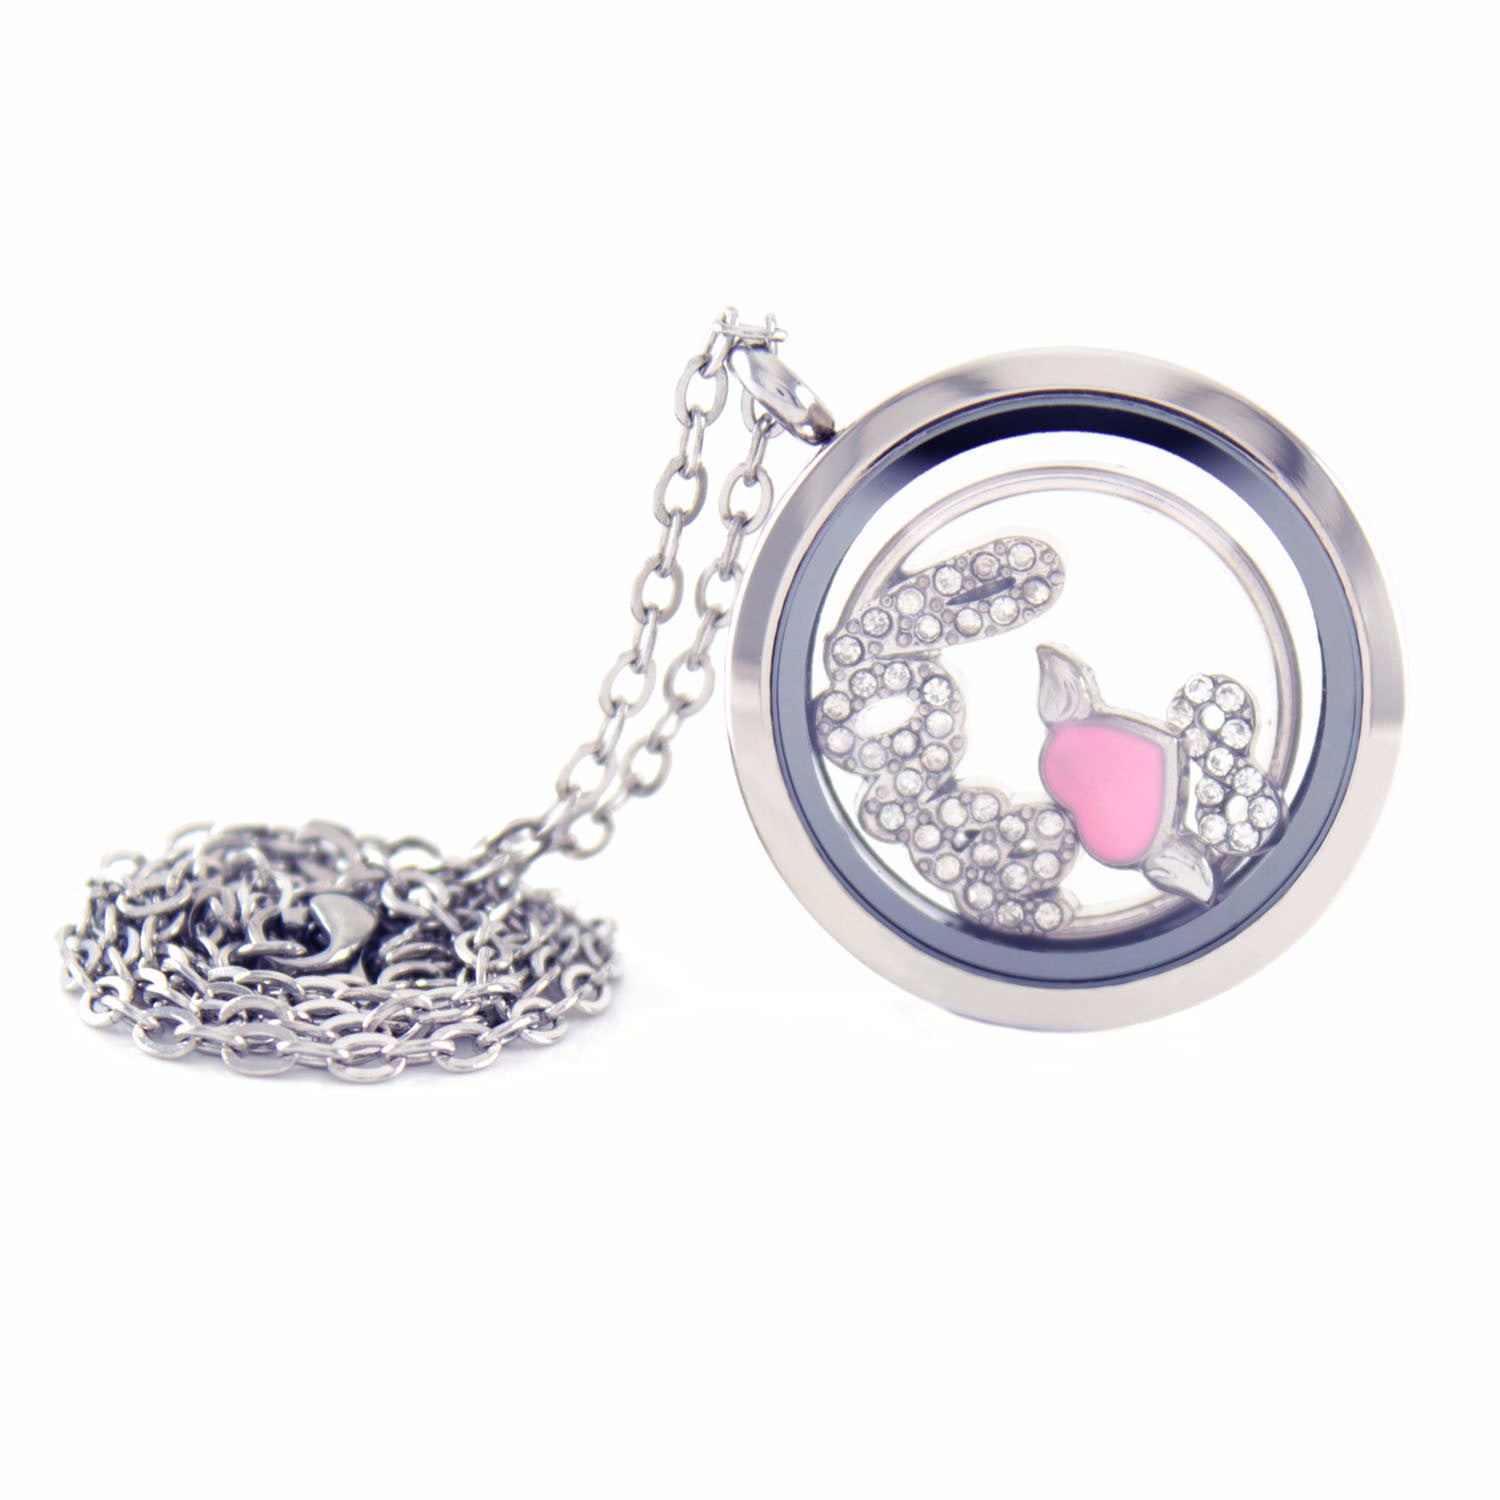 Stainless Steel Floating Locket Necklace with Choice of 6 Charms and 1 Plate (Silver No Stone)